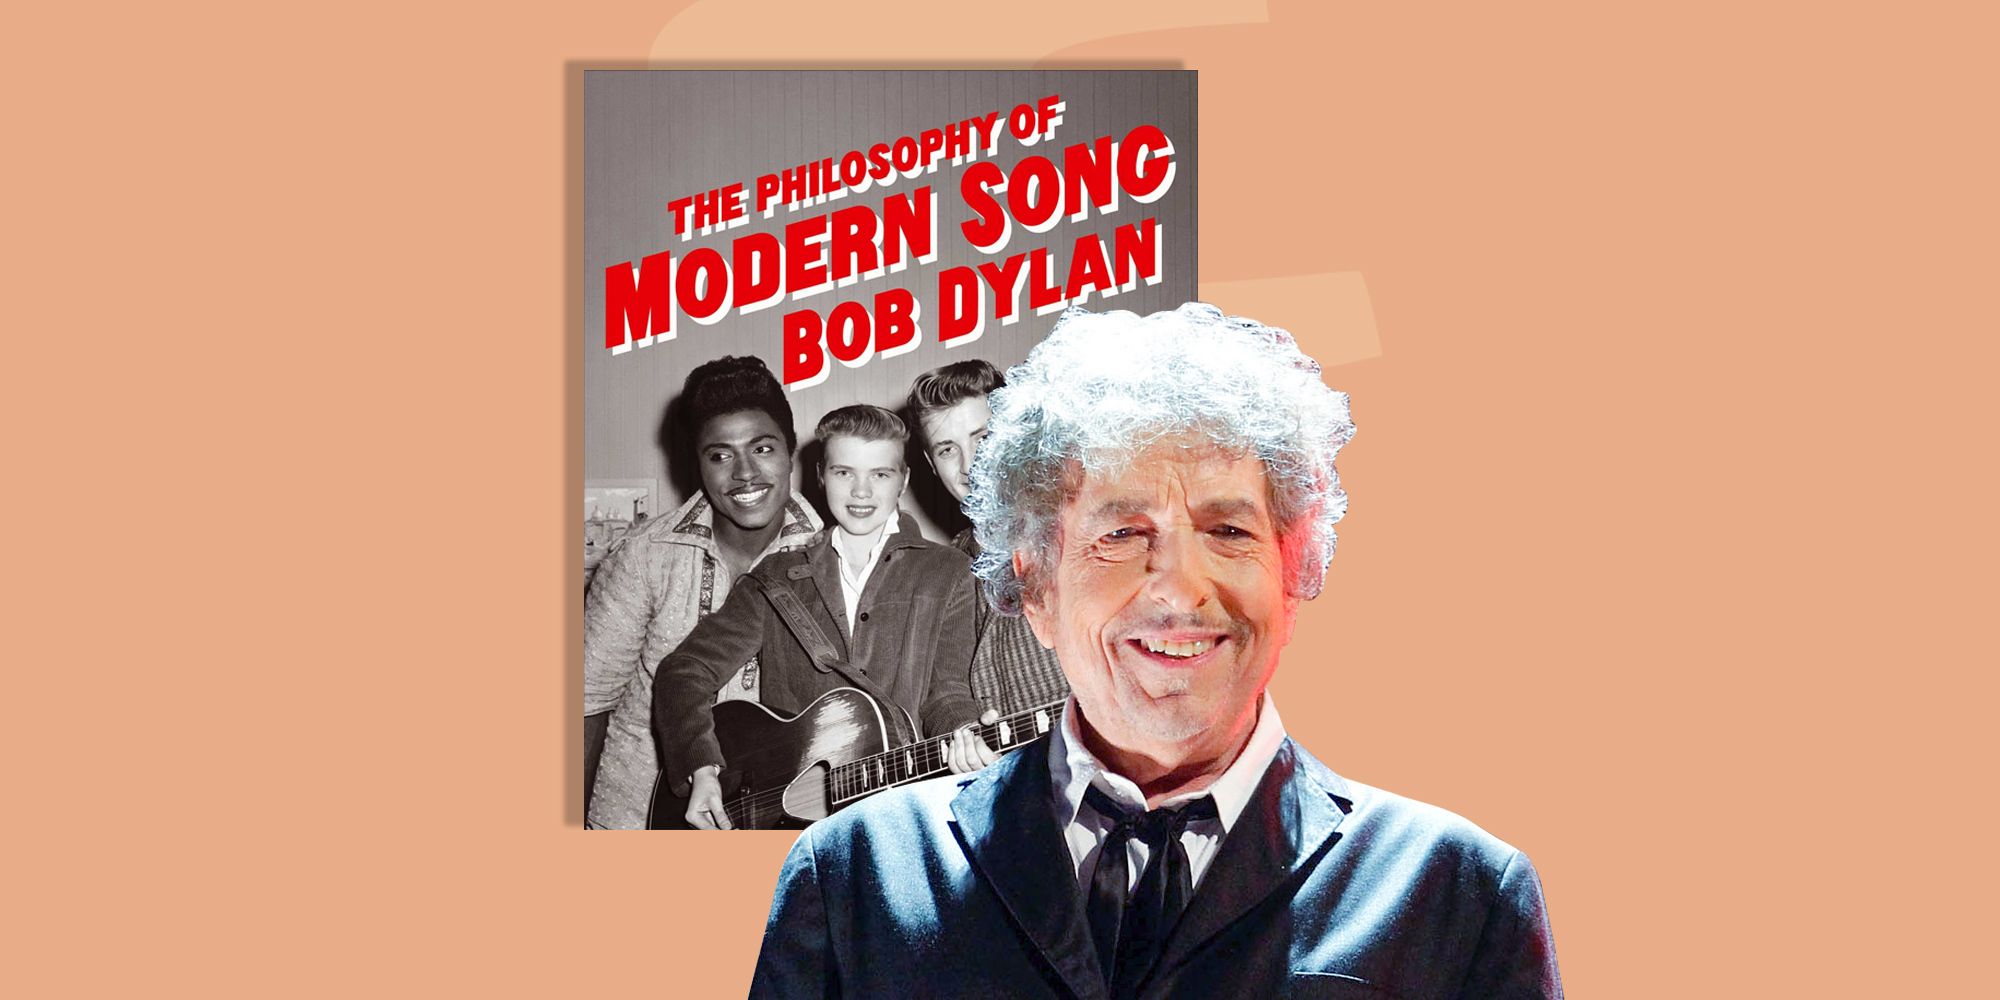 Bob Dylan's 'Philosophy of Modern Song Book Dissects 66 Songs